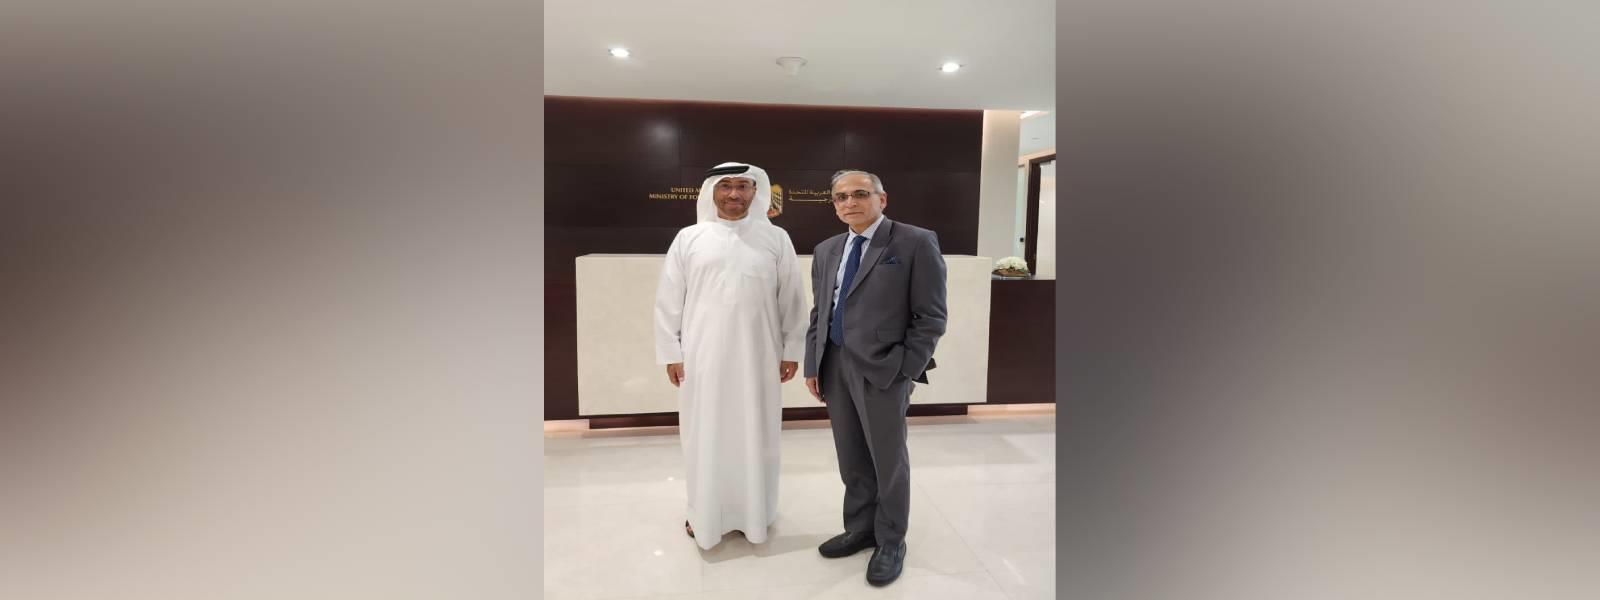 Foreign Secretary, Shri Vinay Kwatra met H.E. Mr. Ahmed Al Saygeh, Minister of State in the Ministry of Foreign Affairs of the United Arab Emirates in Abu Dhabi